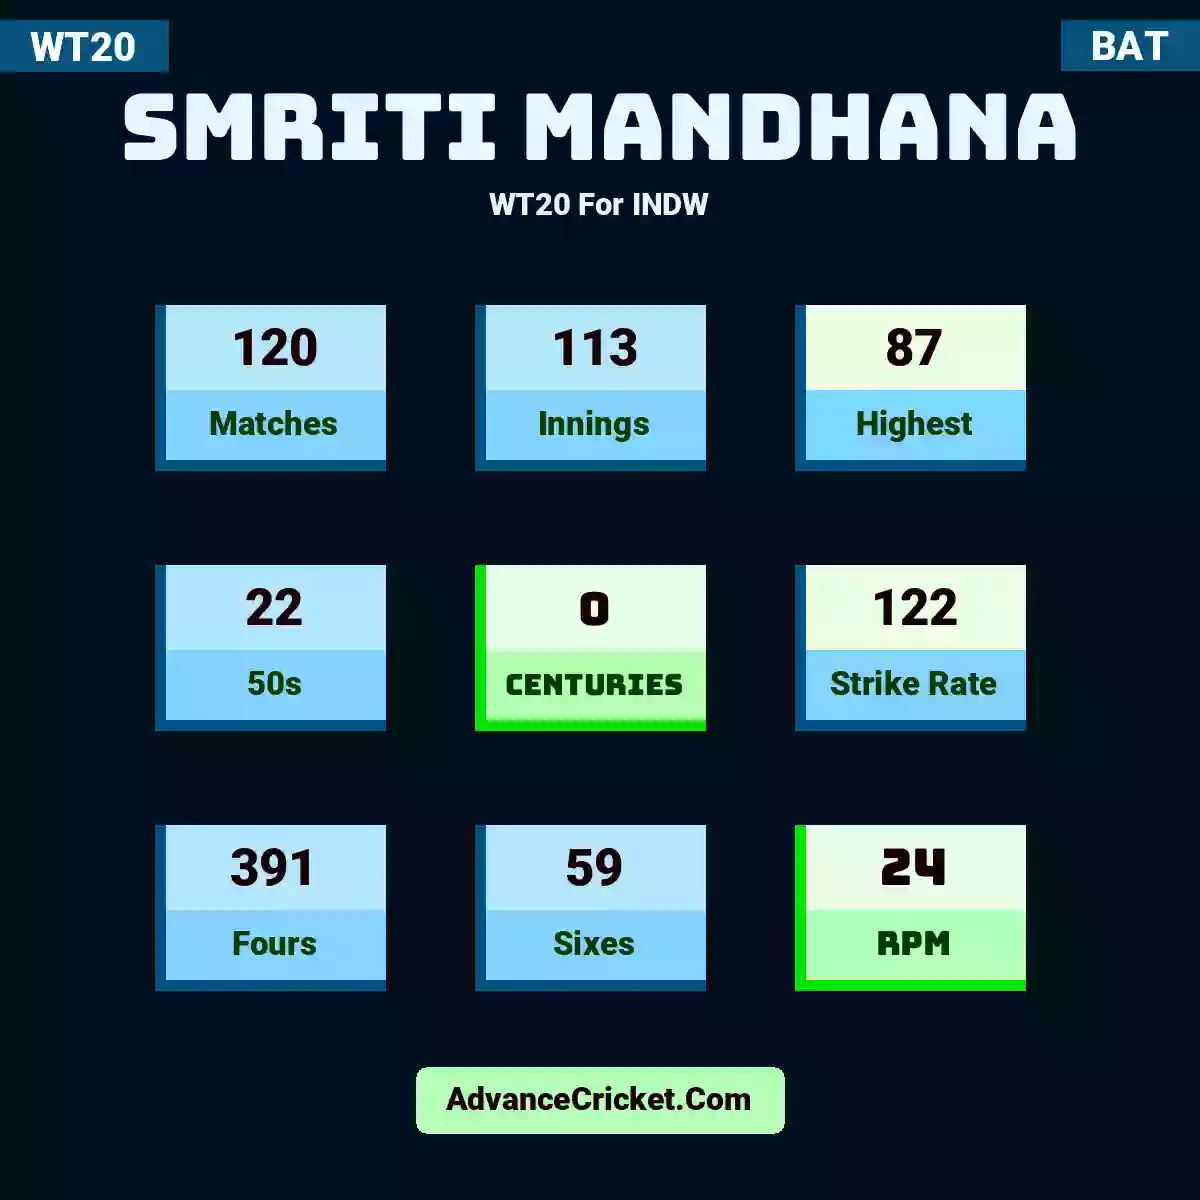 Smriti Mandhana WT20  For INDW, Smriti Mandhana played 117 matches, scored 87 runs as highest, 22 half-centuries, and 0 centuries, with a strike rate of 122. S.Mandhana hit 389 fours and 59 sixes, with an RPM of 24.